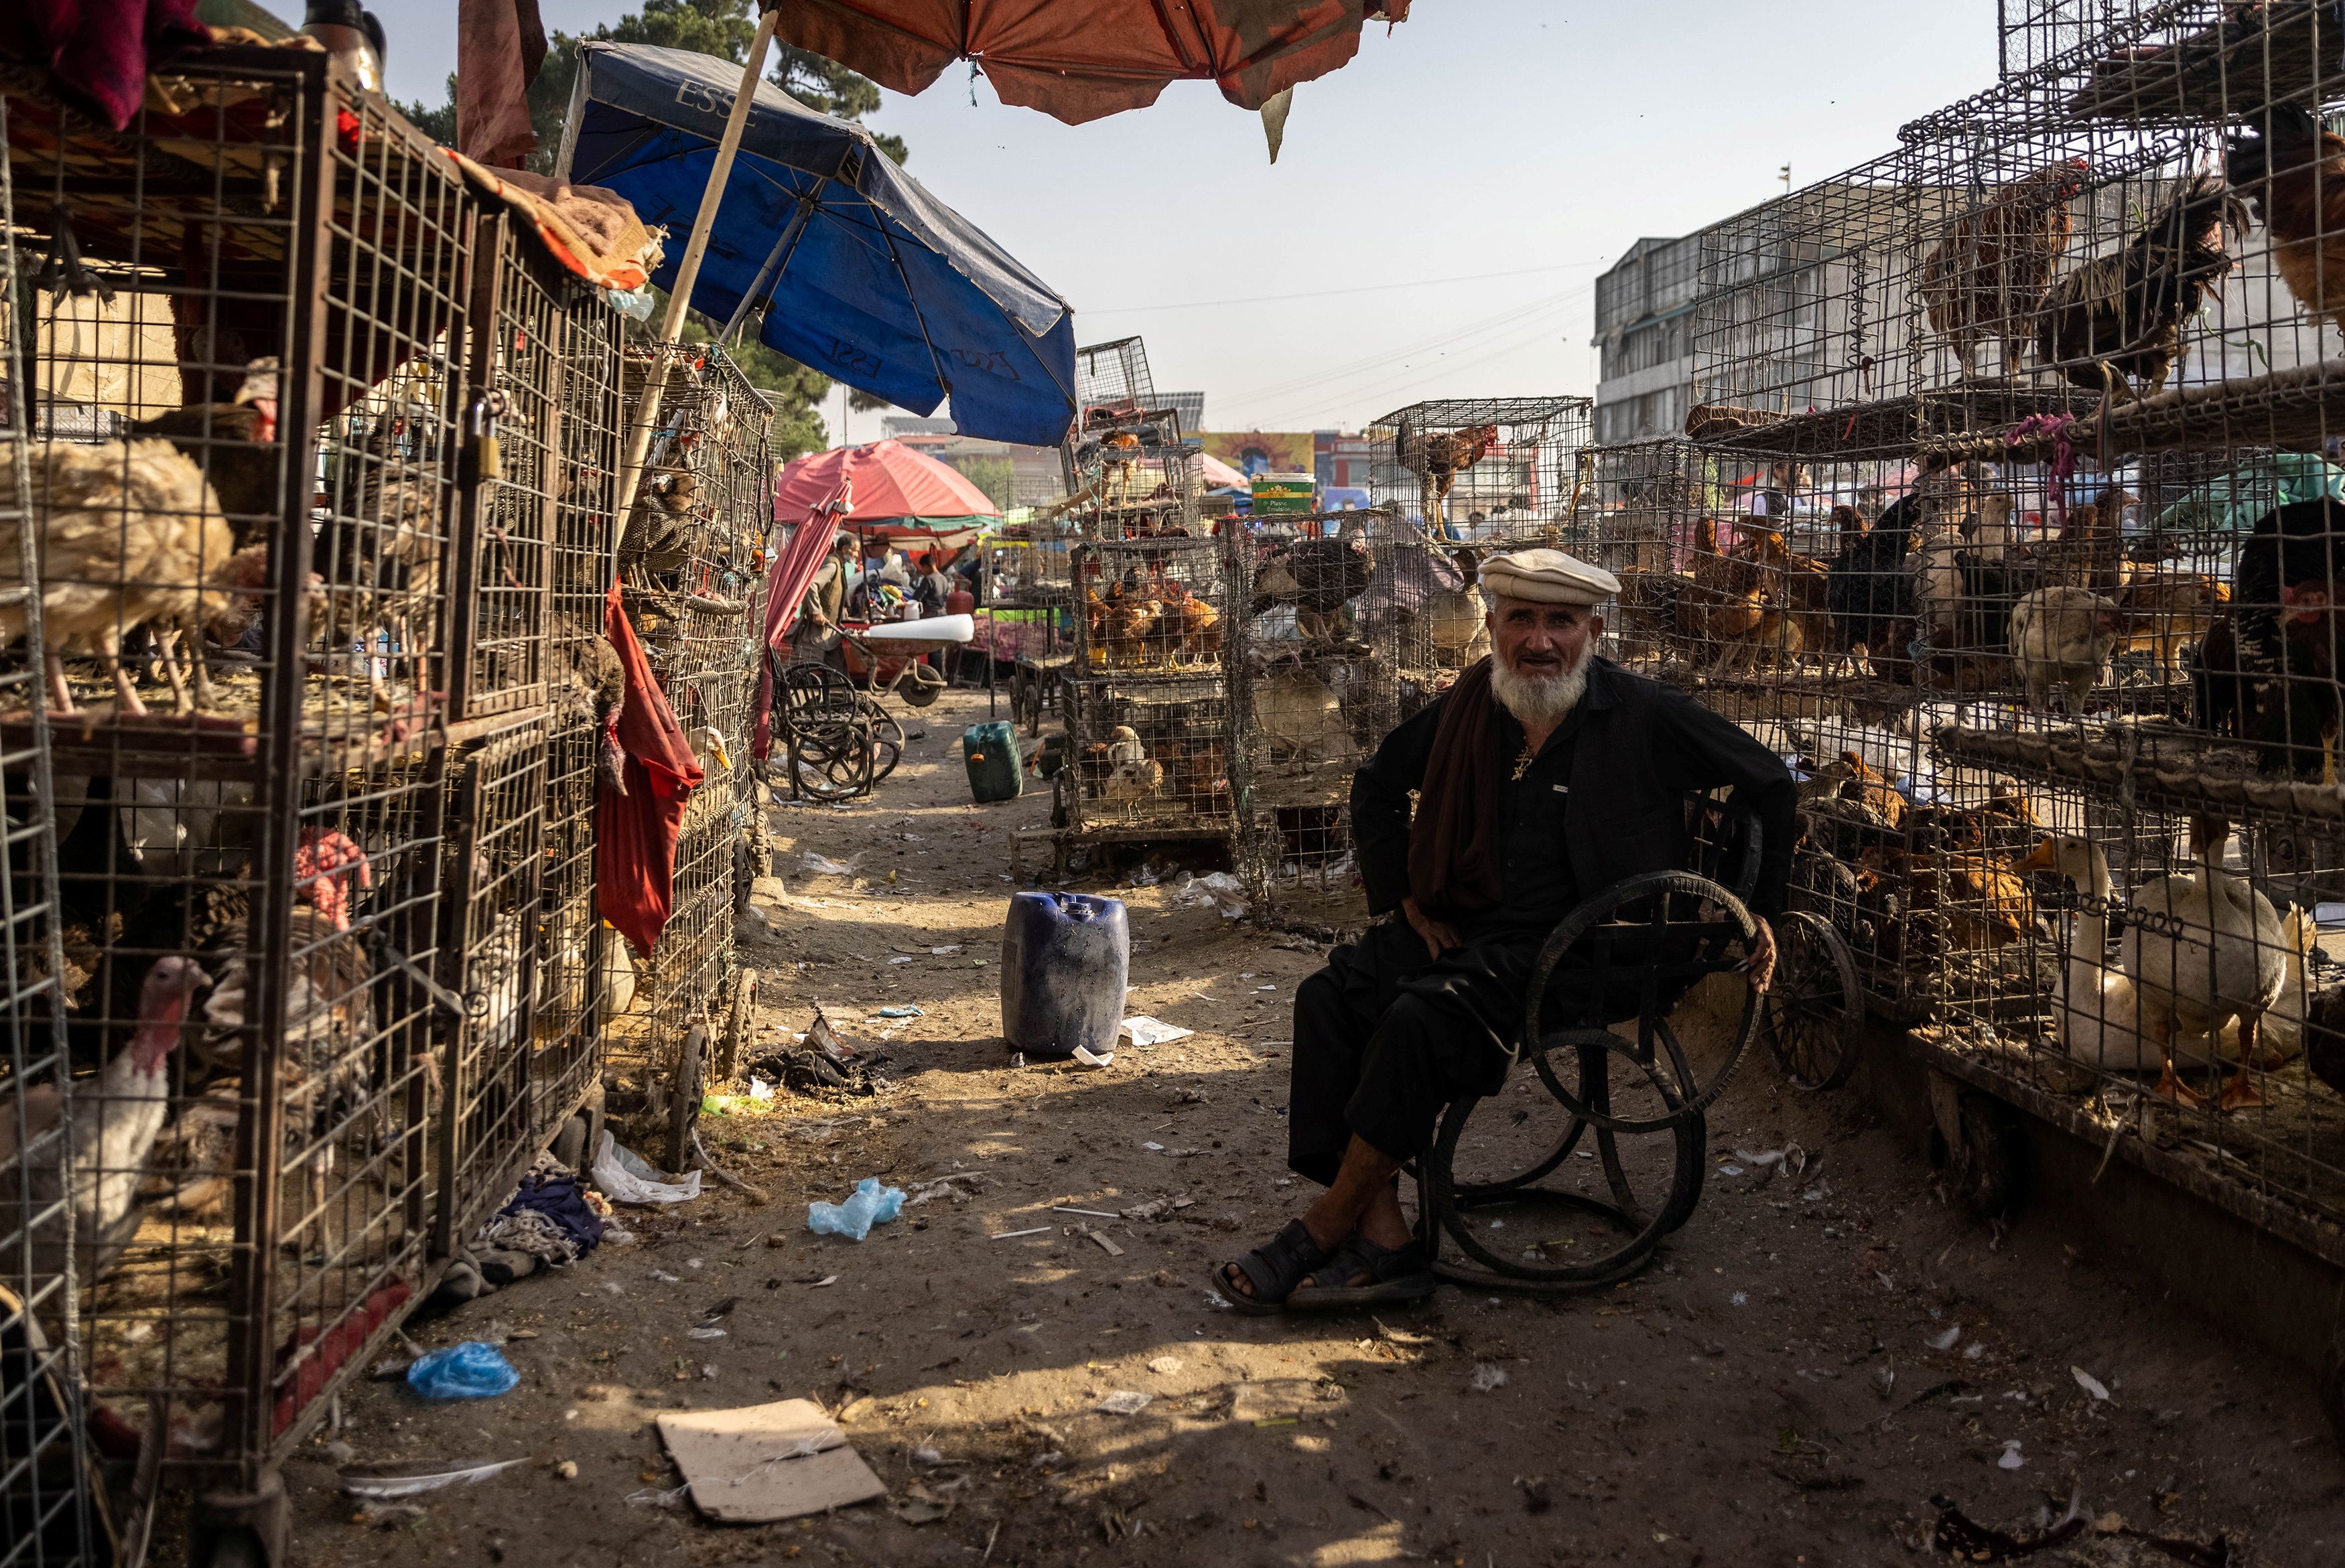 A man selling chicken and ducks at a market along the road in Kabul